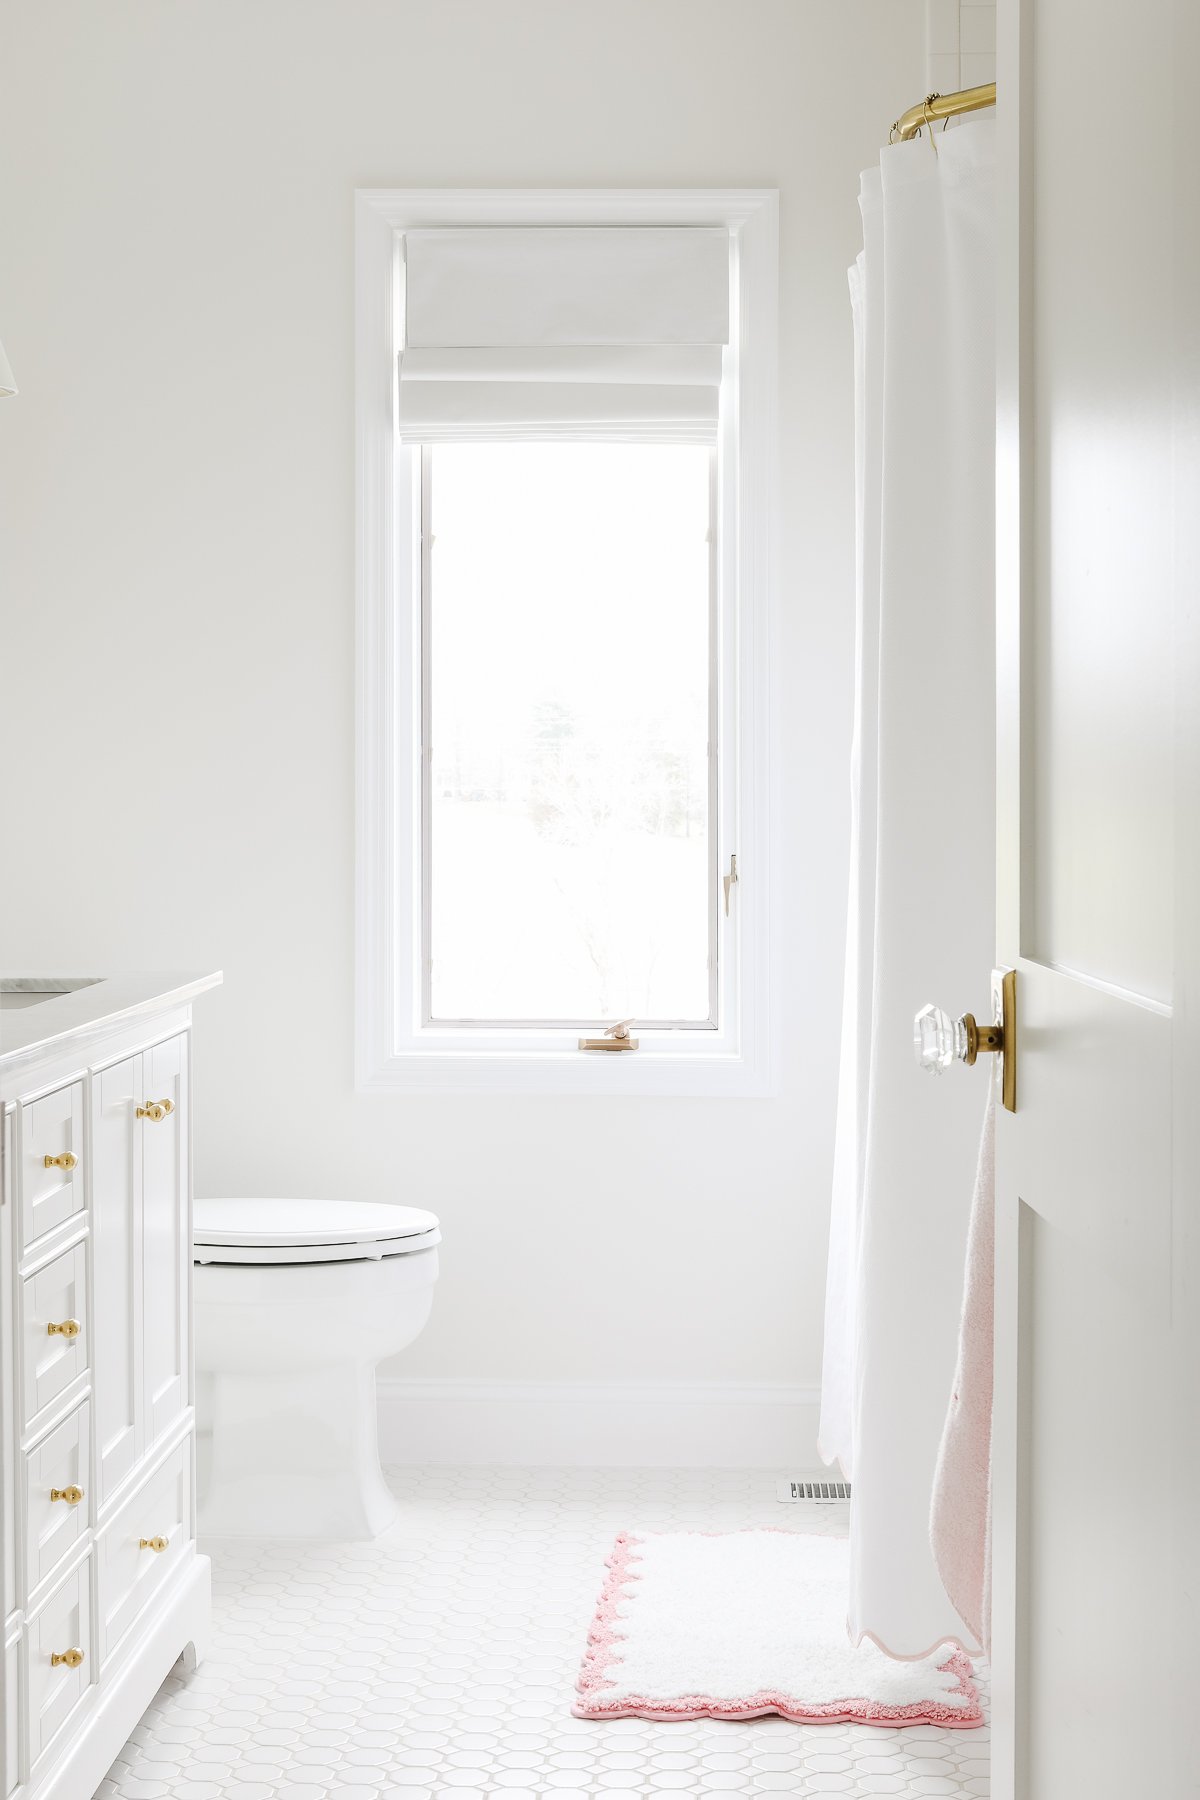 A white bathroom with gold fixtures and a Benjamin Moore White Dove trim.